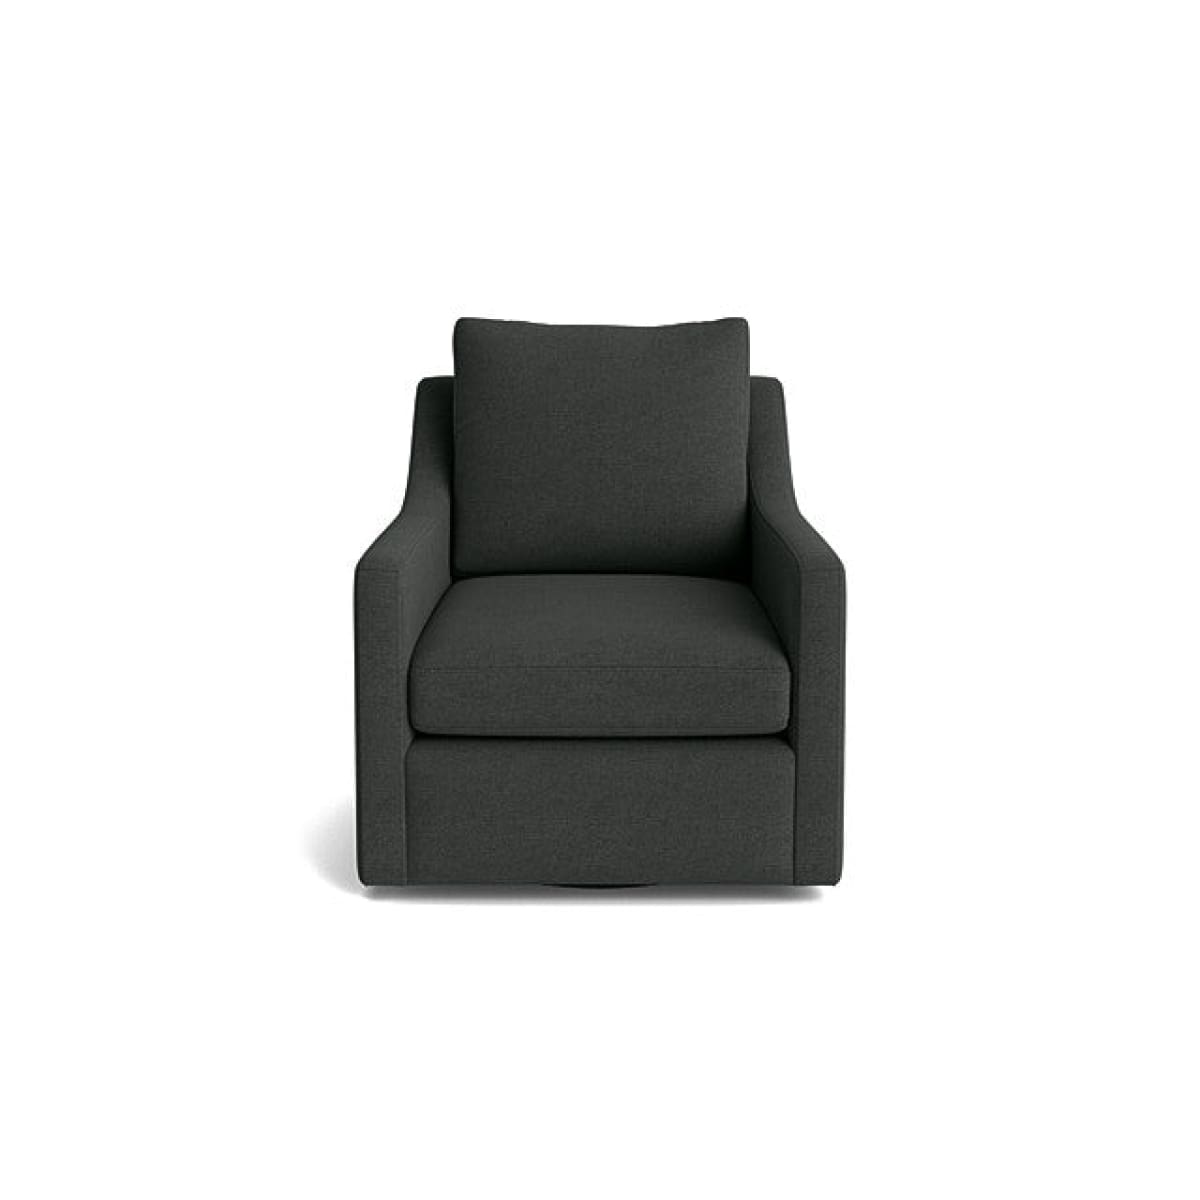 Grove Accent Chair - Entice Steel